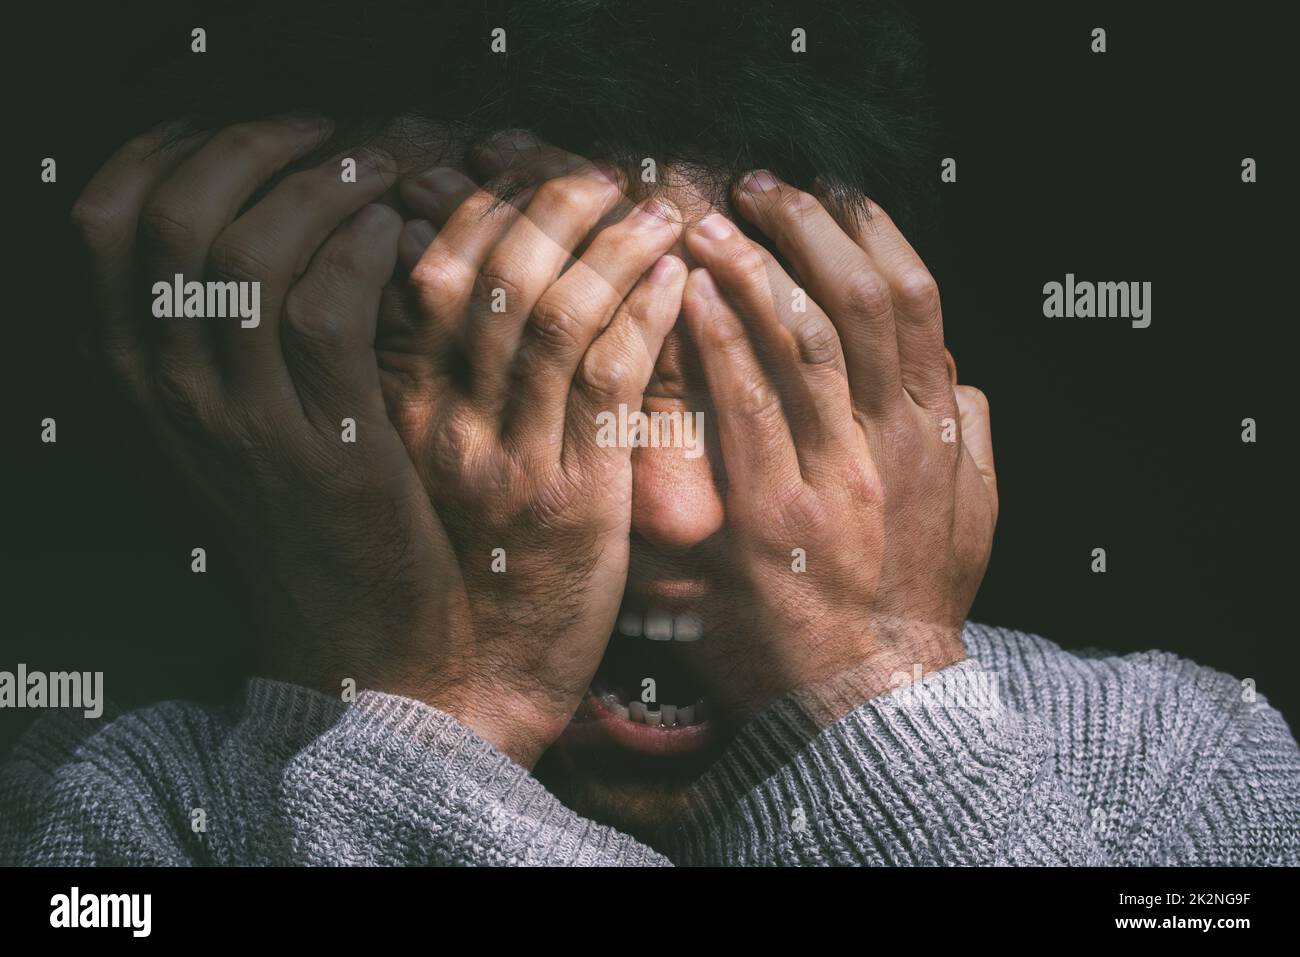 When your mind is your own worst enemy. Studio shot of a young man experiencing mental anguish and screaming against a black background. Stock Photo